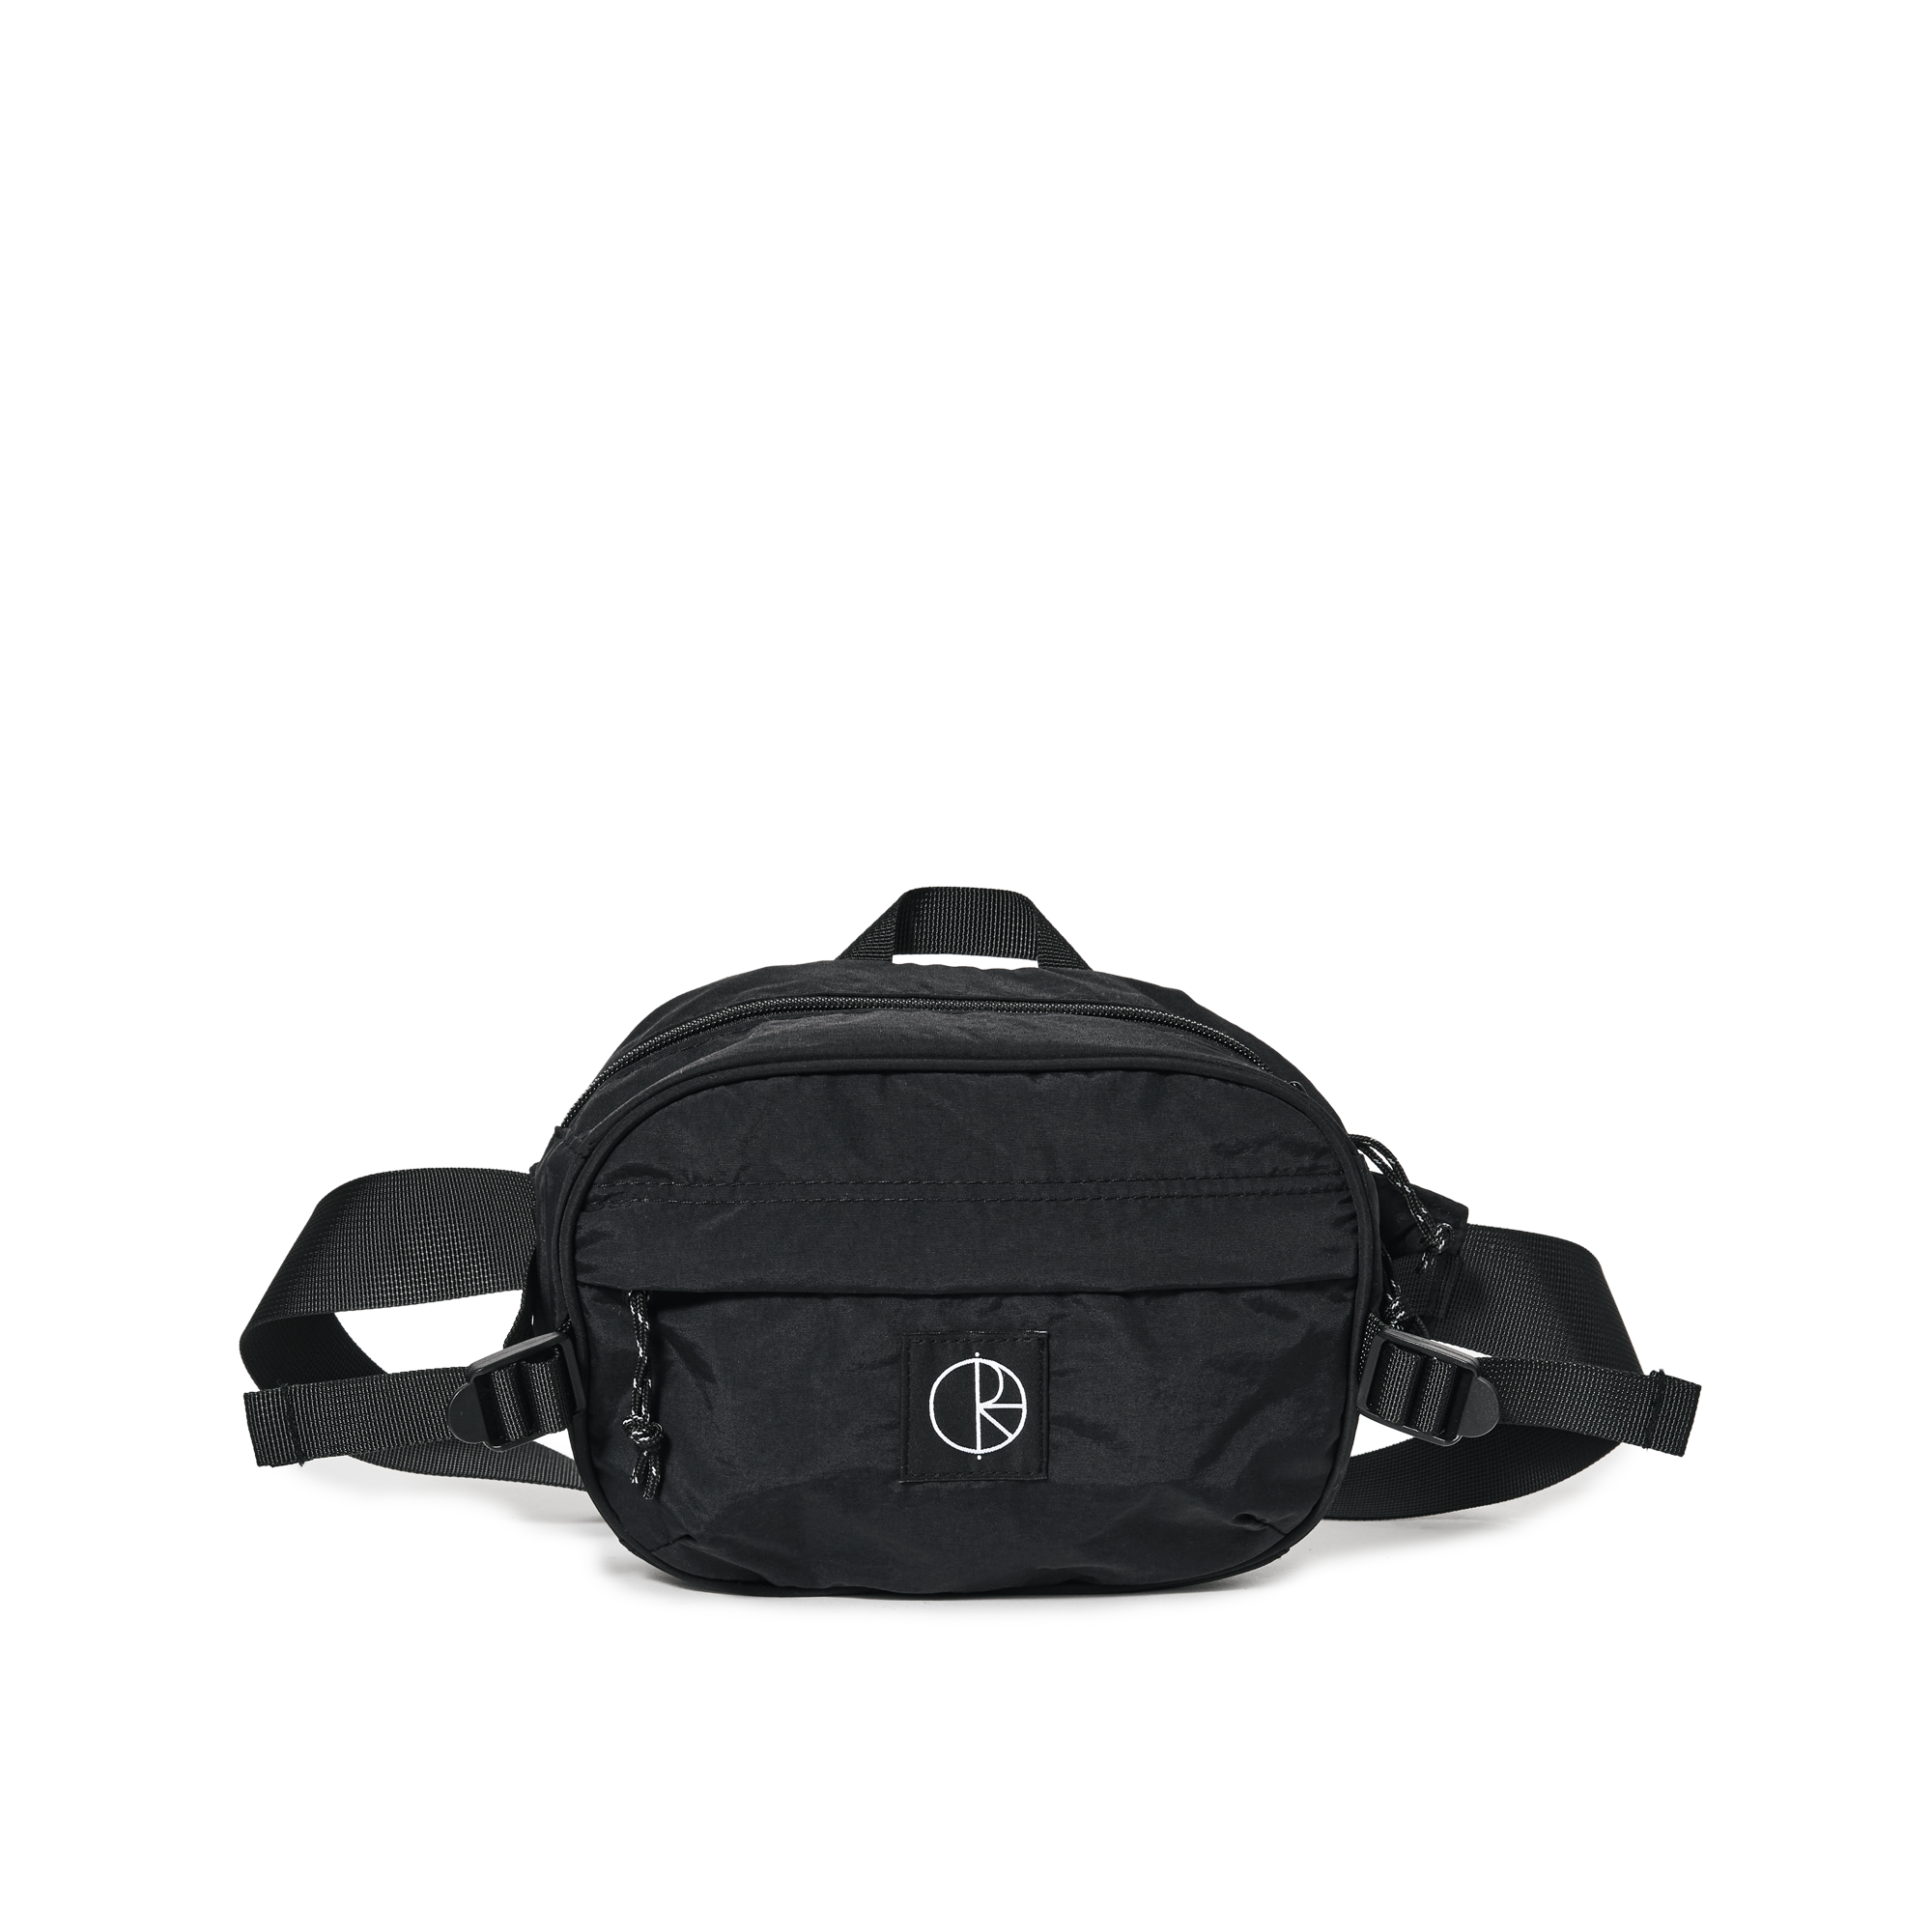 Black polar nylon hip bag with black patch logo on front. Card and cash pockets inside. Free uk shipping on orders over £50